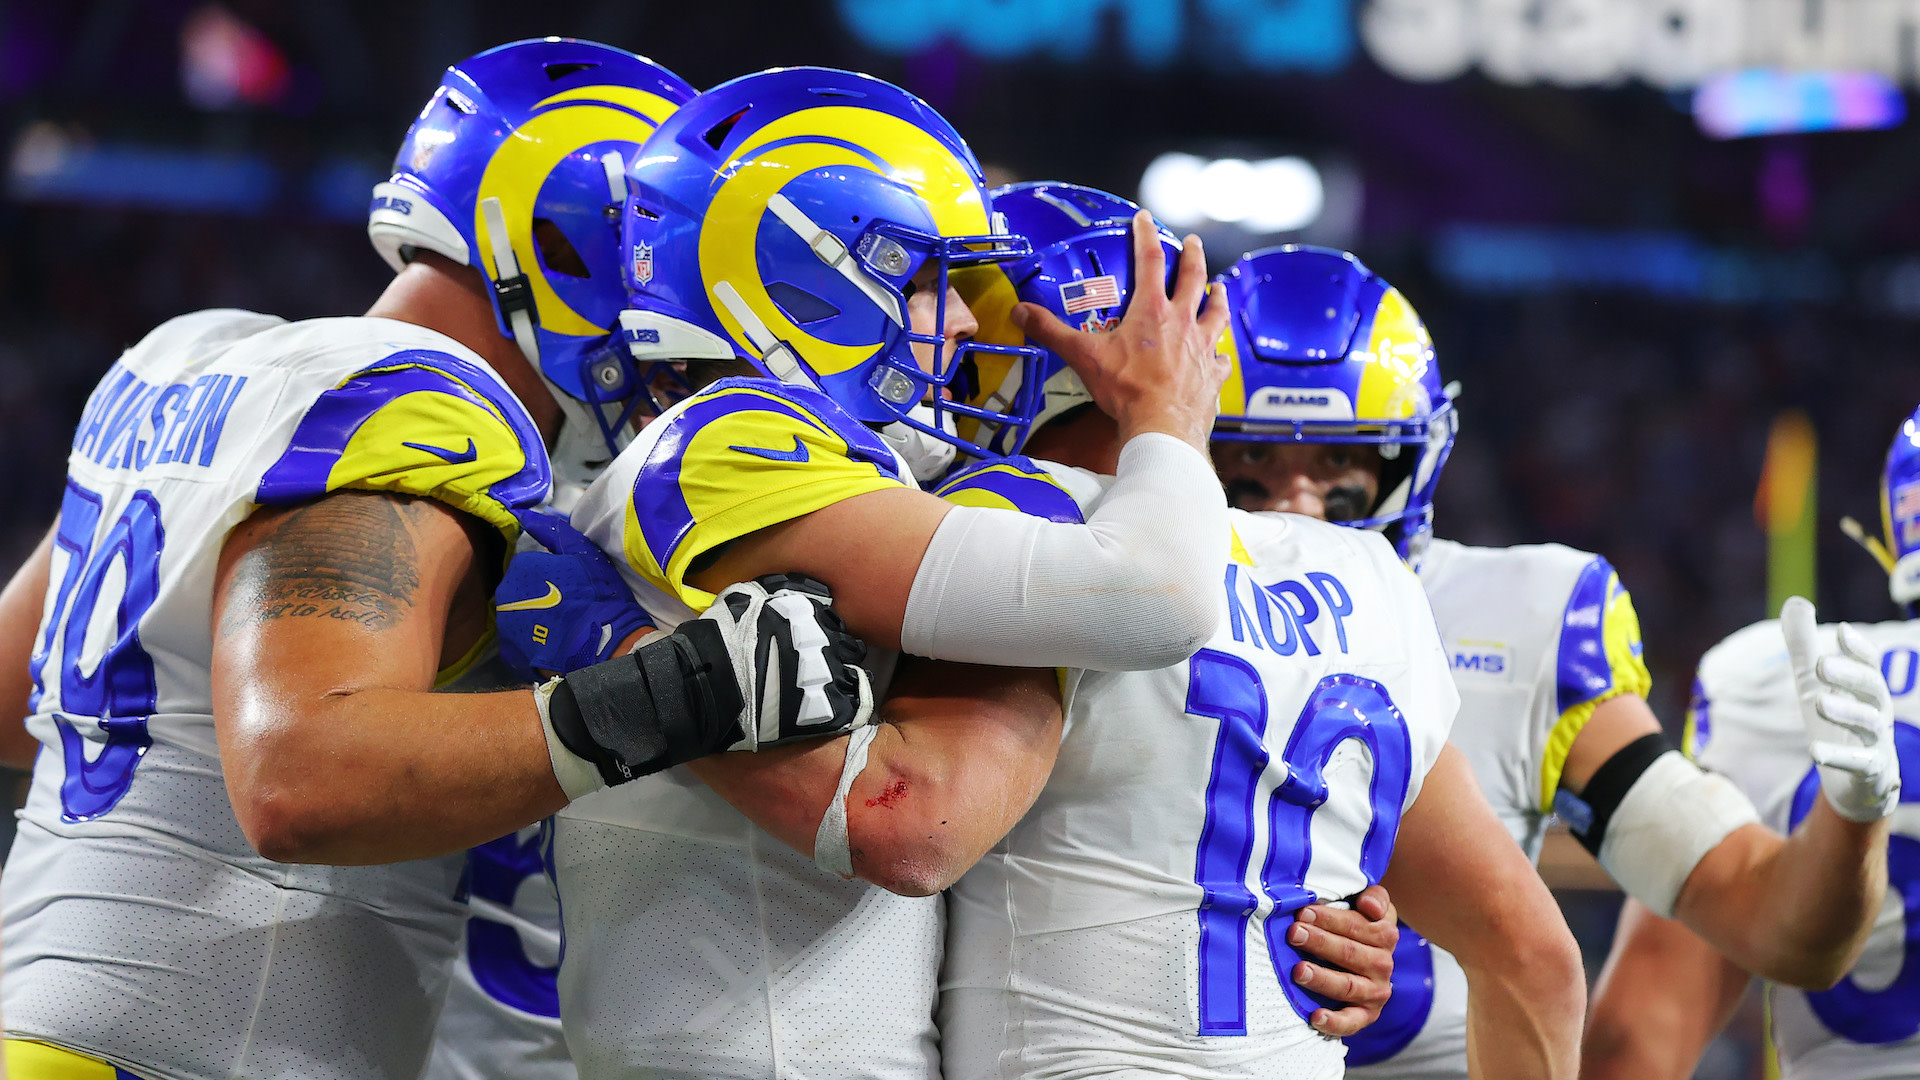 Cooper Kupp #10 of the Los Angeles Rams reacts with Matthew Stafford #9 following a touchdown reception.